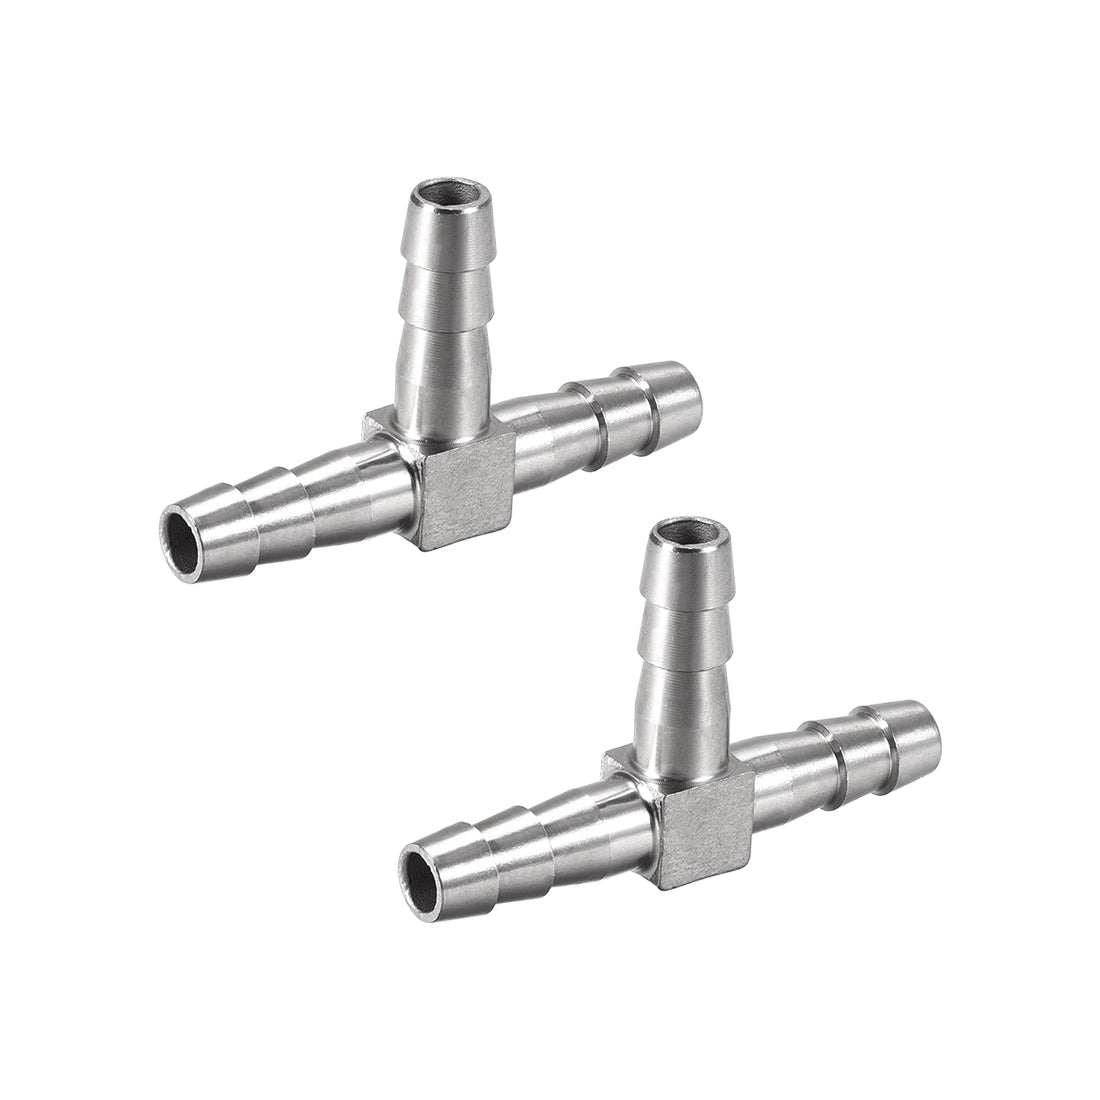 uxcell Uxcell 3/8-Inch (10mm) Hose ID Barb Fitting Stainless Steel 3 Way T Shaped Union Home Brew Fitting 2pcs